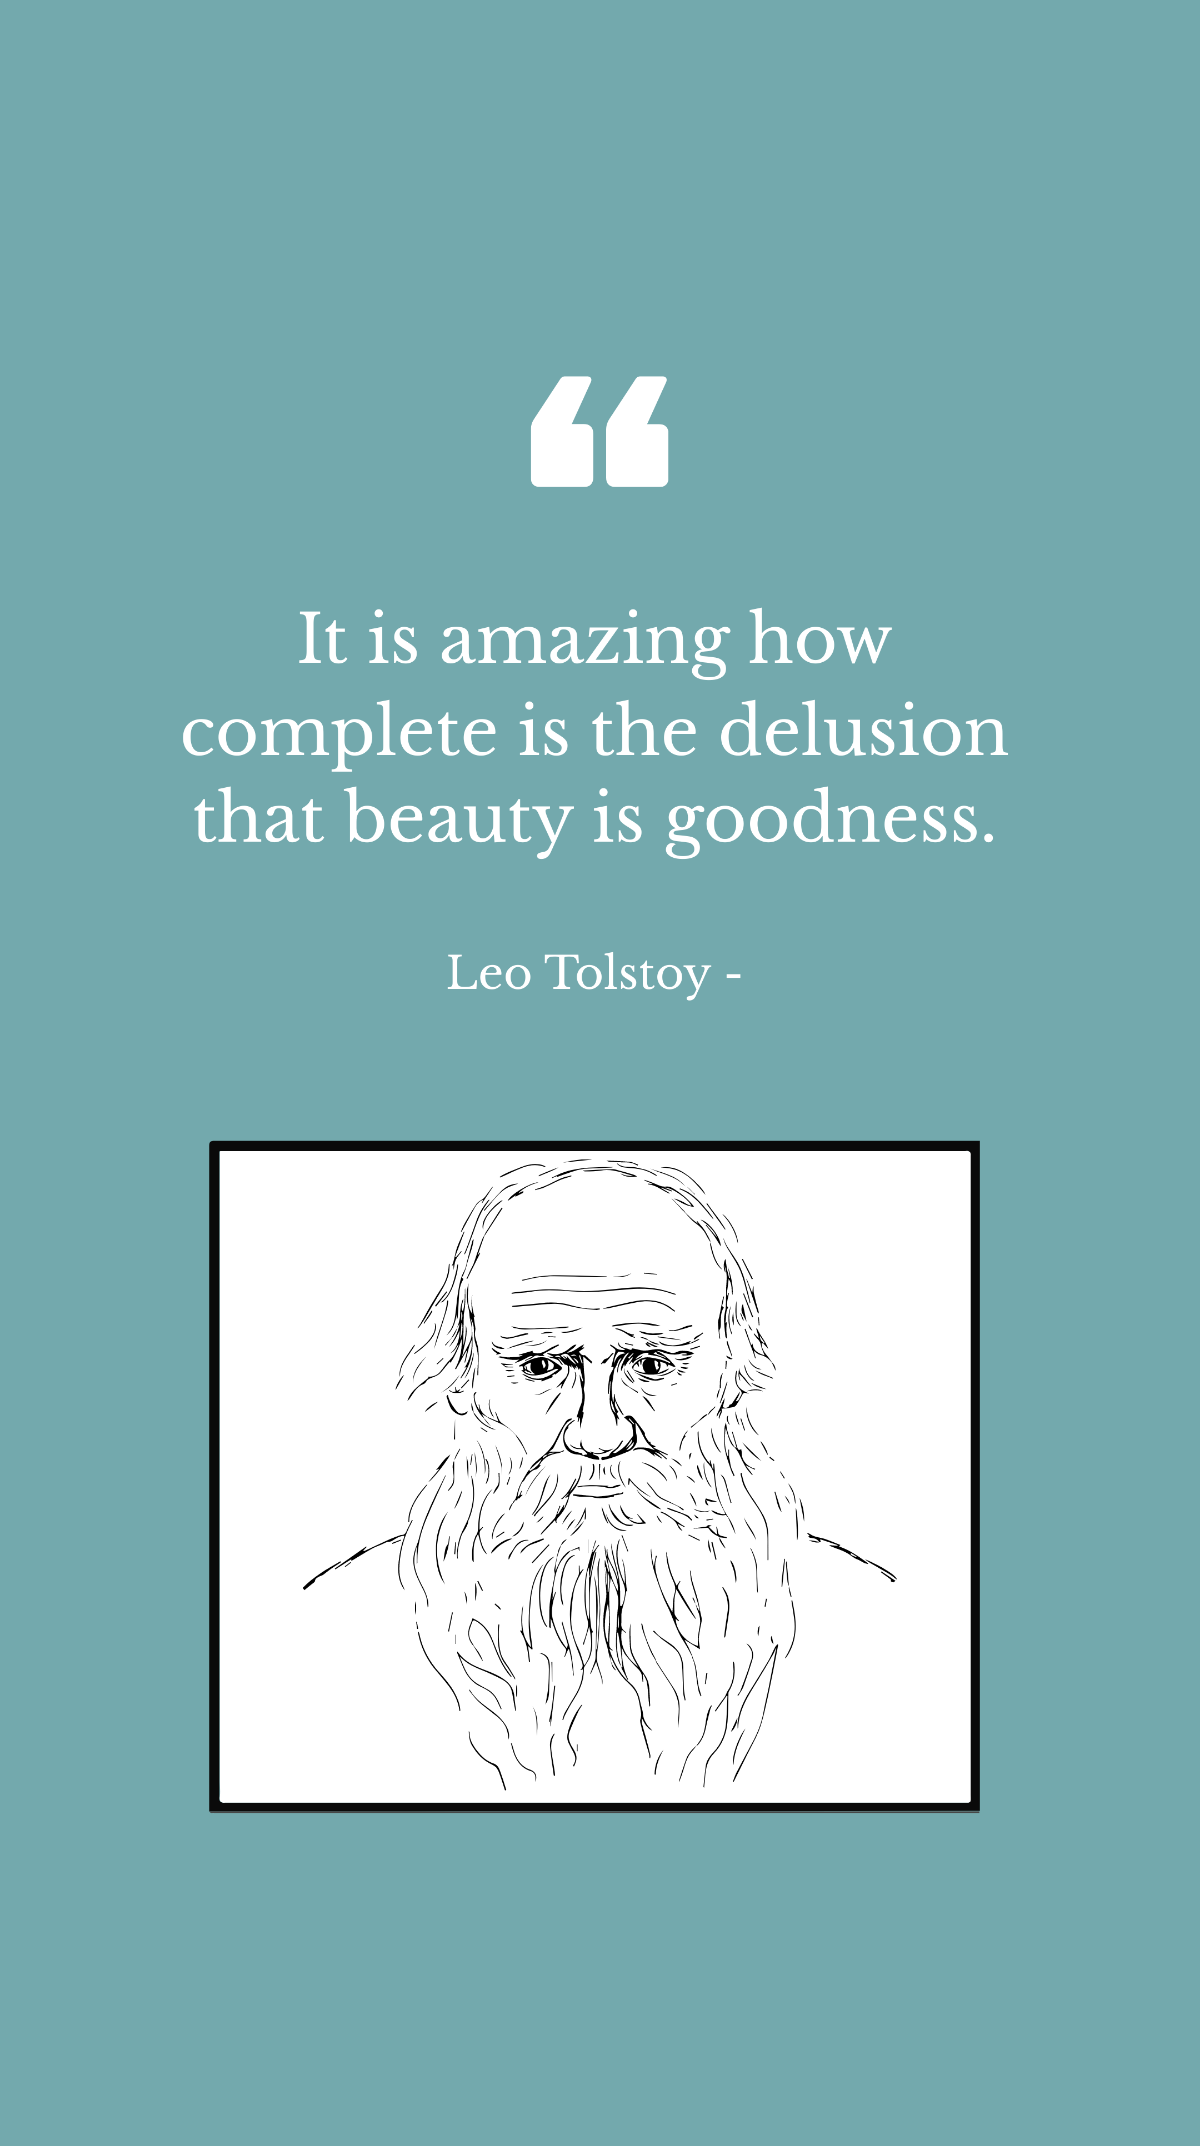 Leo Tolstoy - It is amazing how complete is the delusion that beauty is goodness. Template